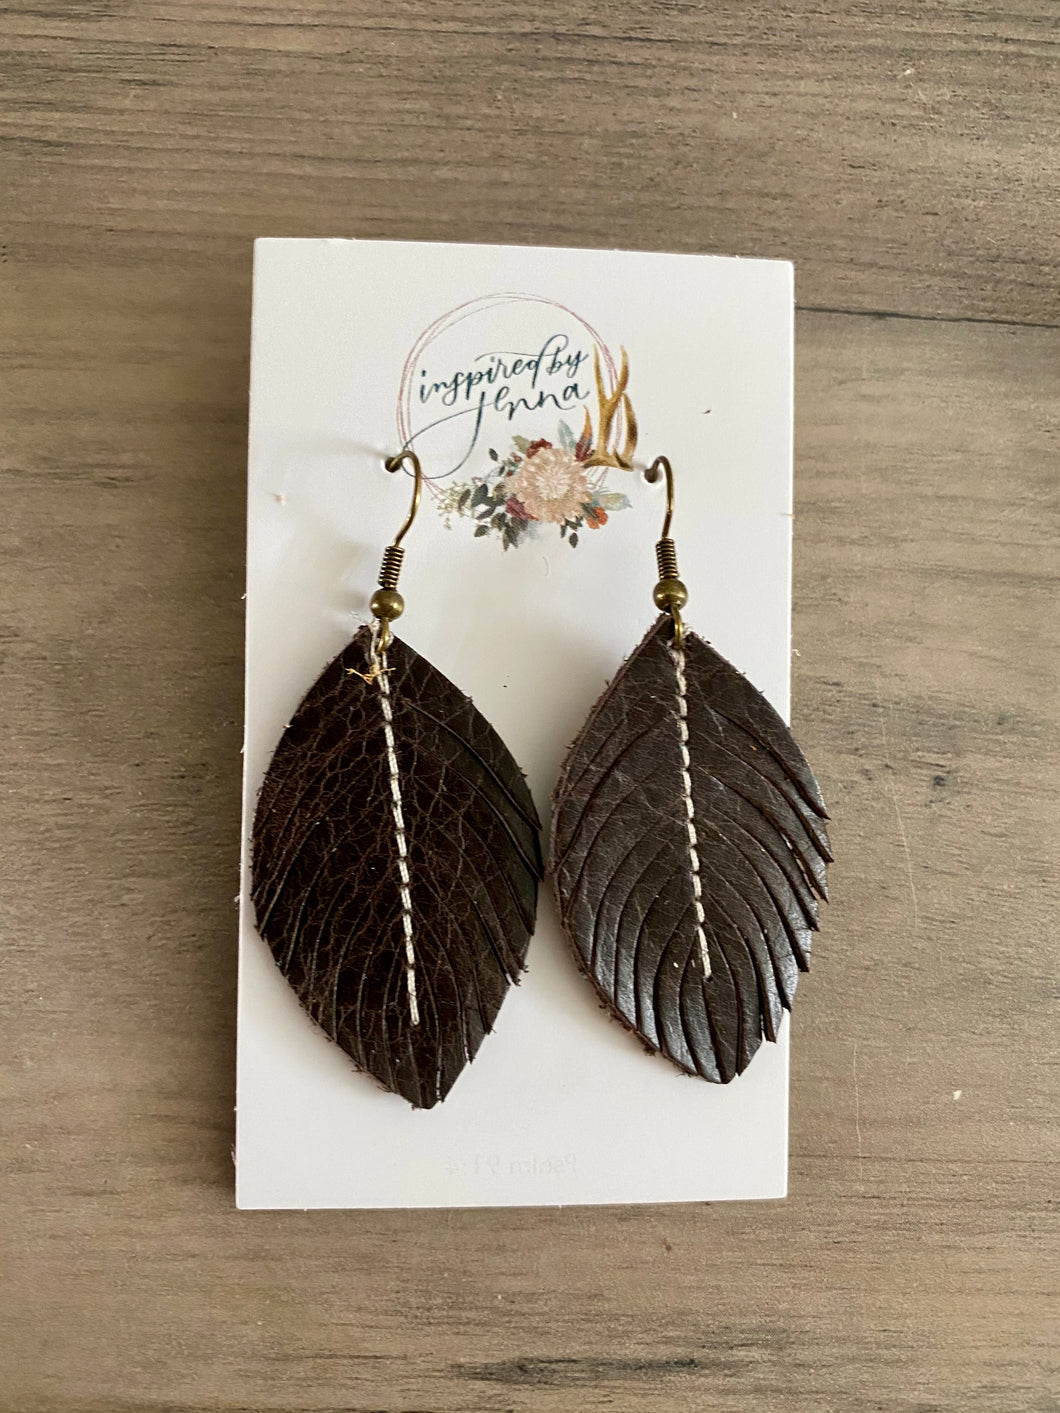 Dark Chocolate Leather Feather Earrings (4 sizes)